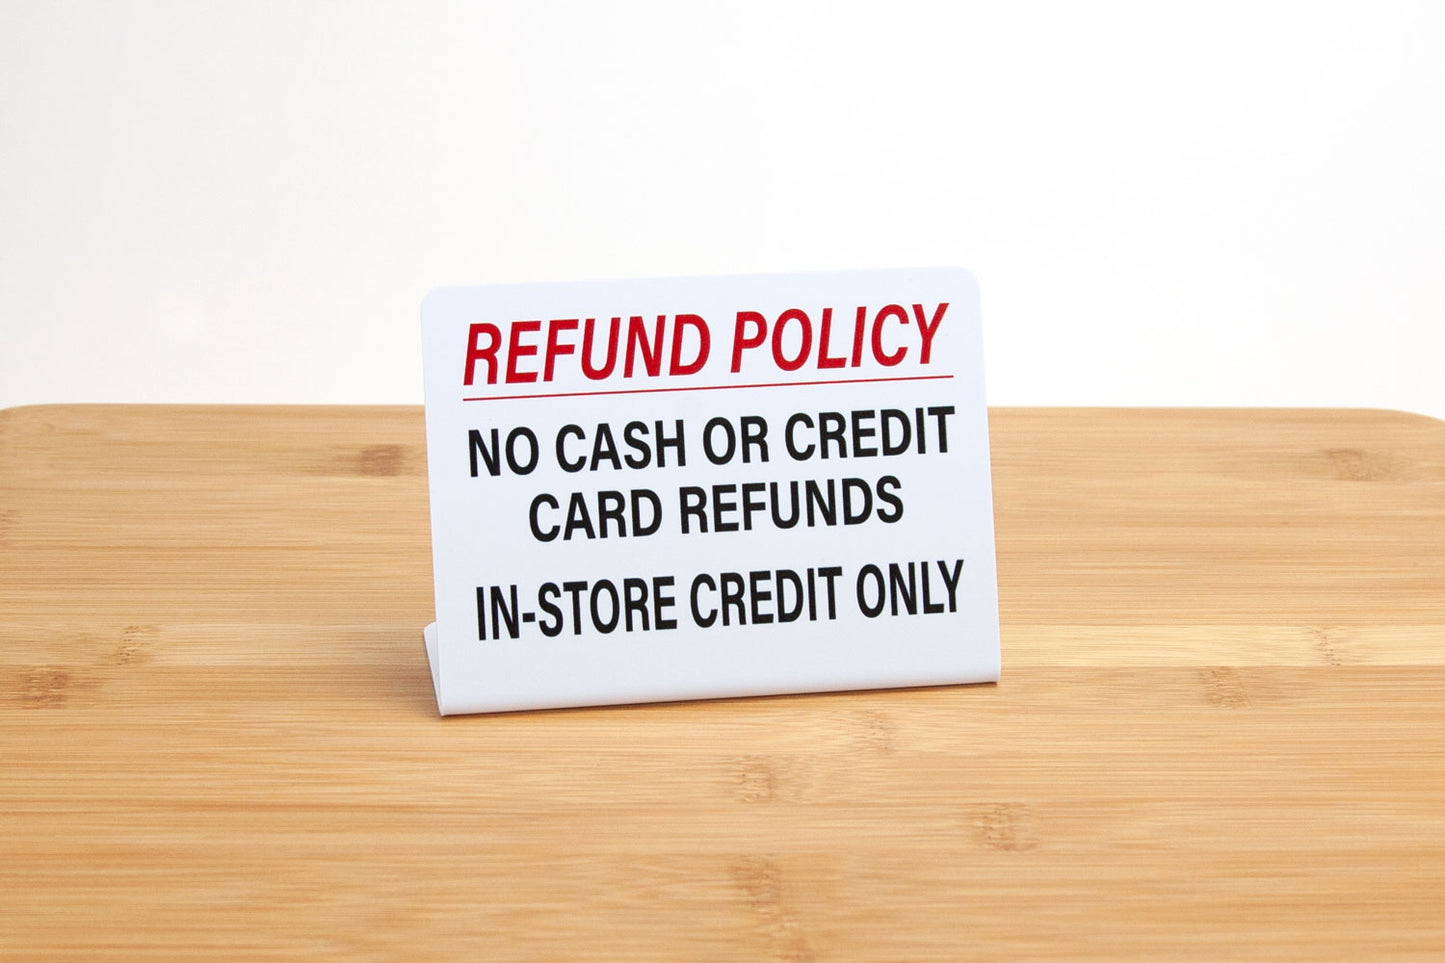 Refund Policy Signs - In-Store Credit Only